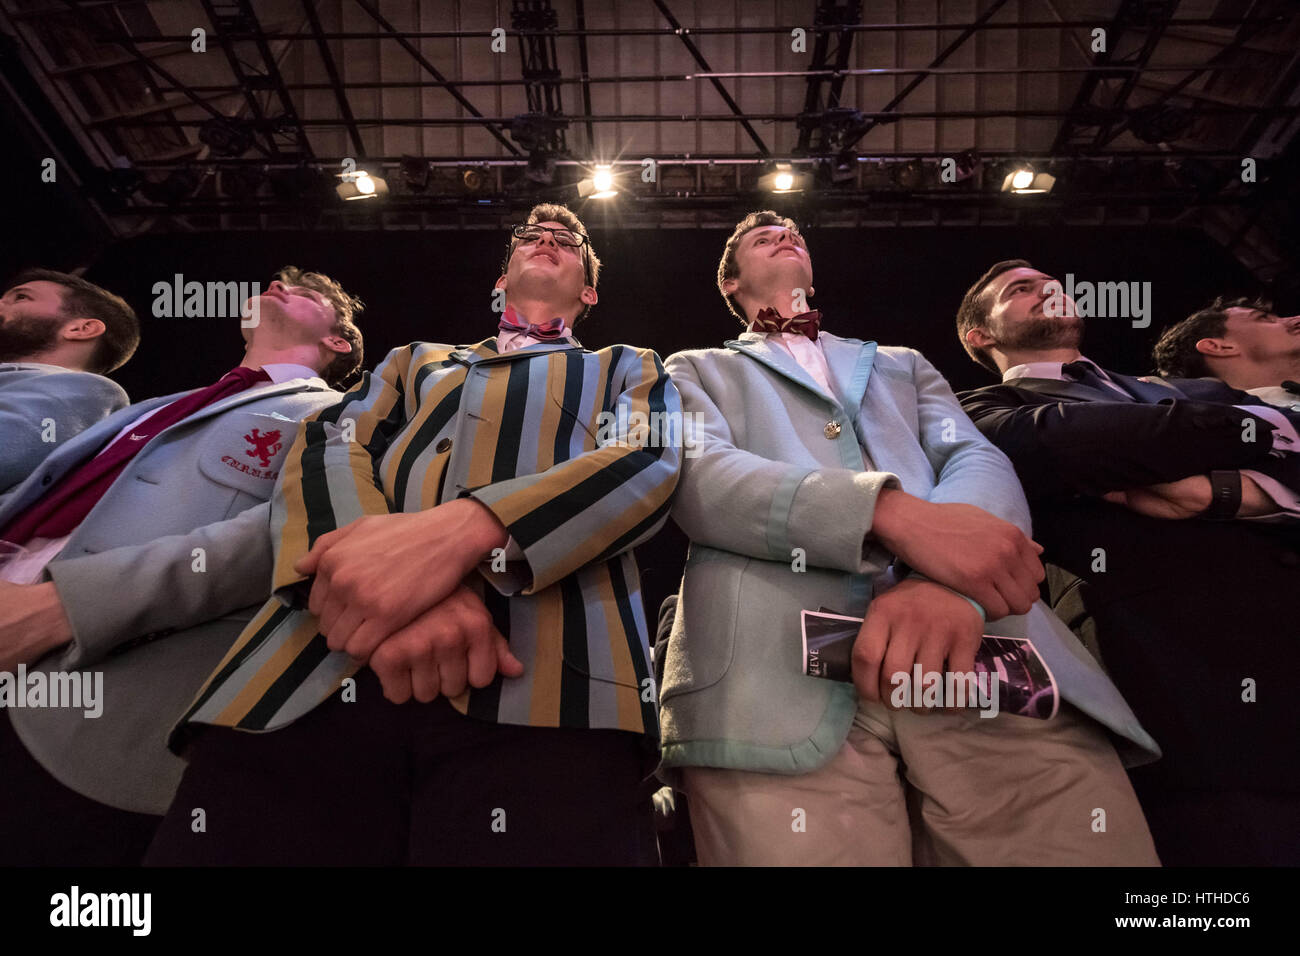 Cambridge, UK. 10th March, 2017. Cambridge supporters. Oxford vs Cambridge. 110th Boxing Varsity Match at the Cambridge Corn Exchange. Cambridge, UK. © Guy Corbishley/Alamy Live News Stock Photo